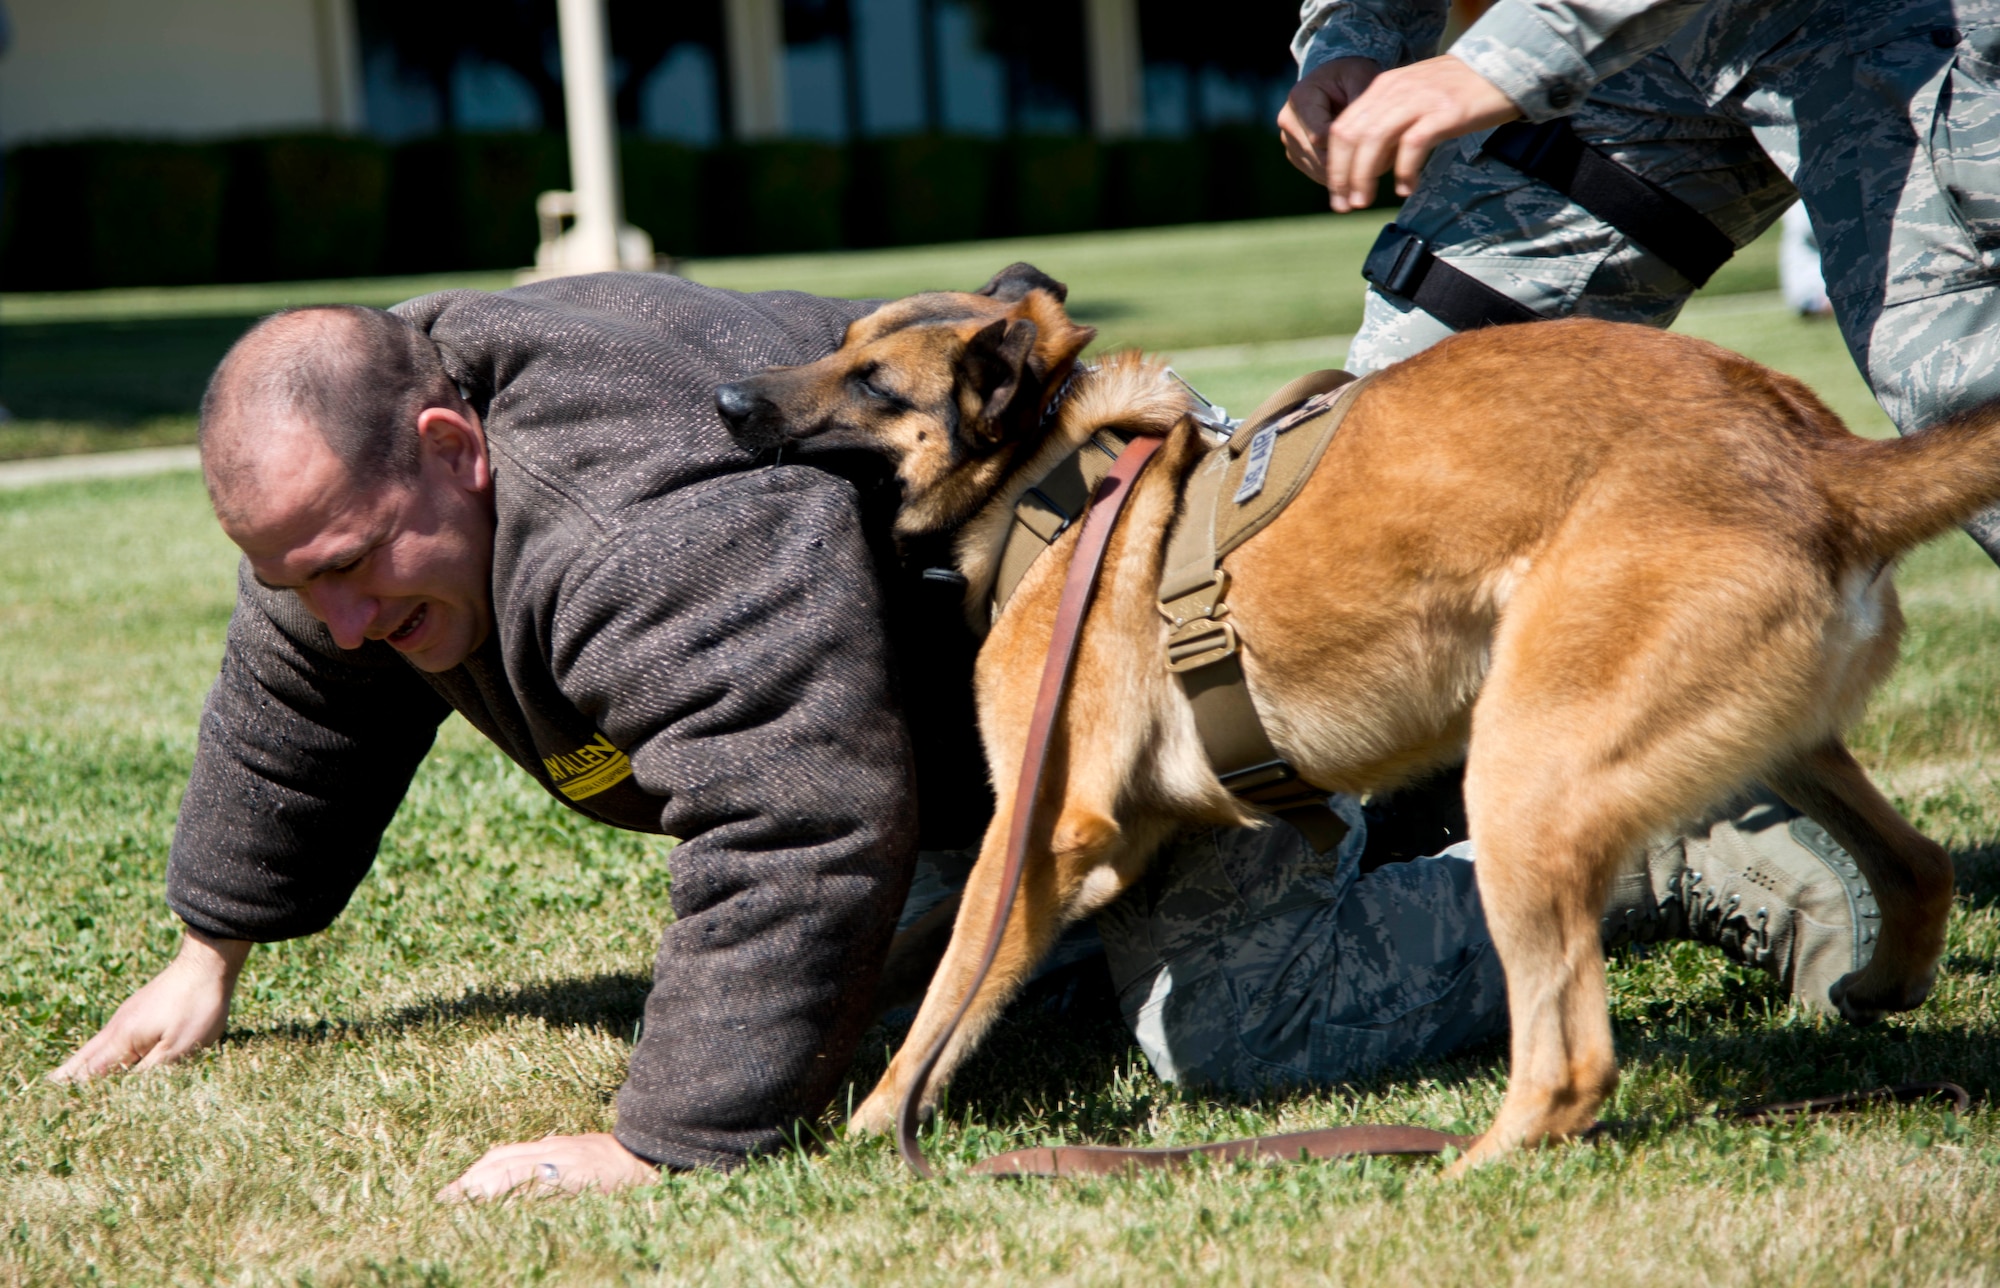 Staff Sgt. Joshua Hayes, 60th Security Forces Squadron Military Working Dog handler, gets taken down by Beni, 60th SFS MWD, during a demonstration at Thunder Over Solano Air Expo and Open House May 3 at Travis. (U.S. Air Force photo/Senior Airman Nicole Leidholm)